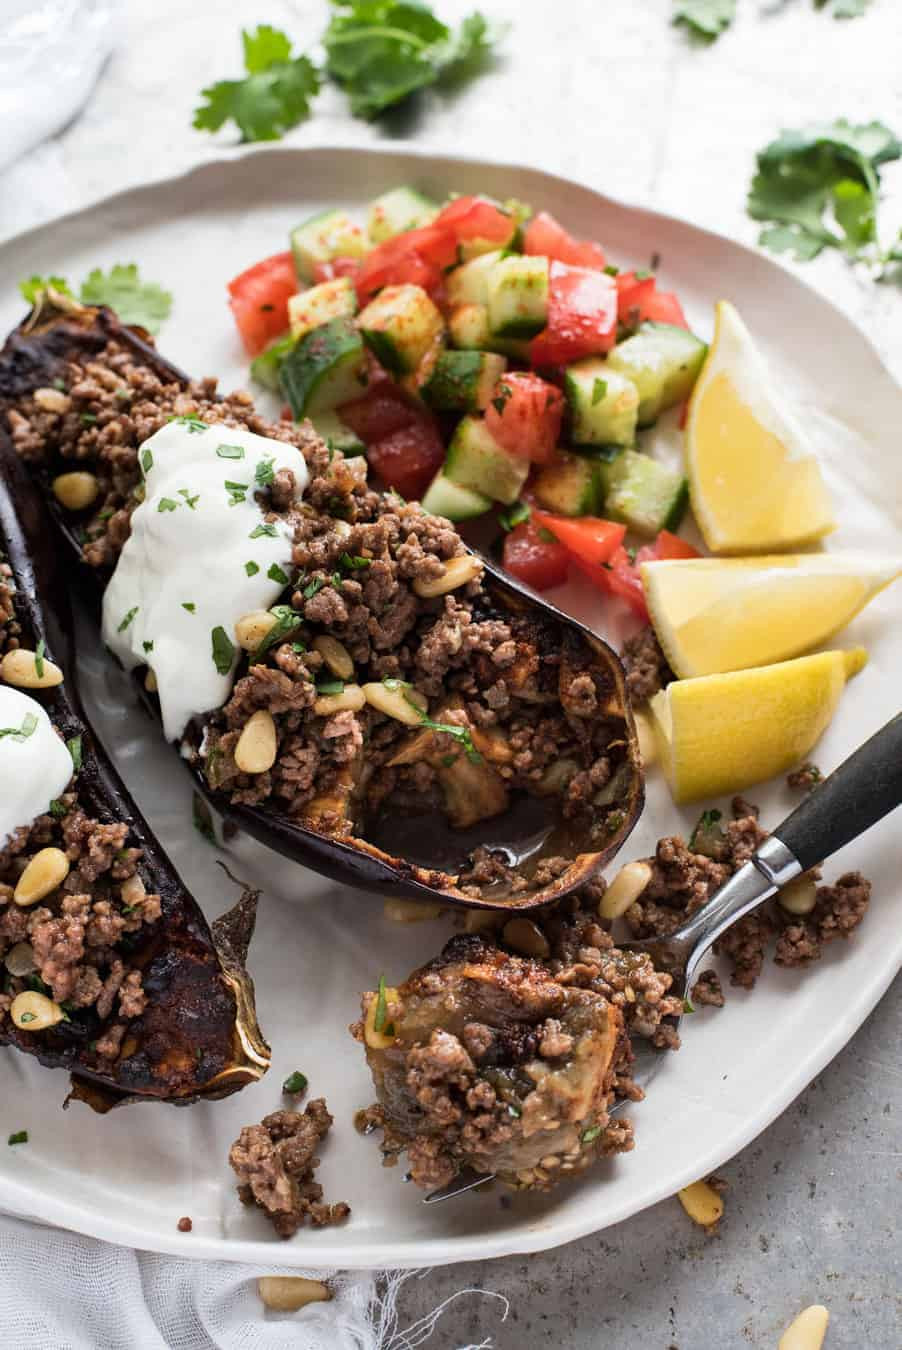 Healthy Veal Recipes
 Moroccan Baked Eggplant with Beef